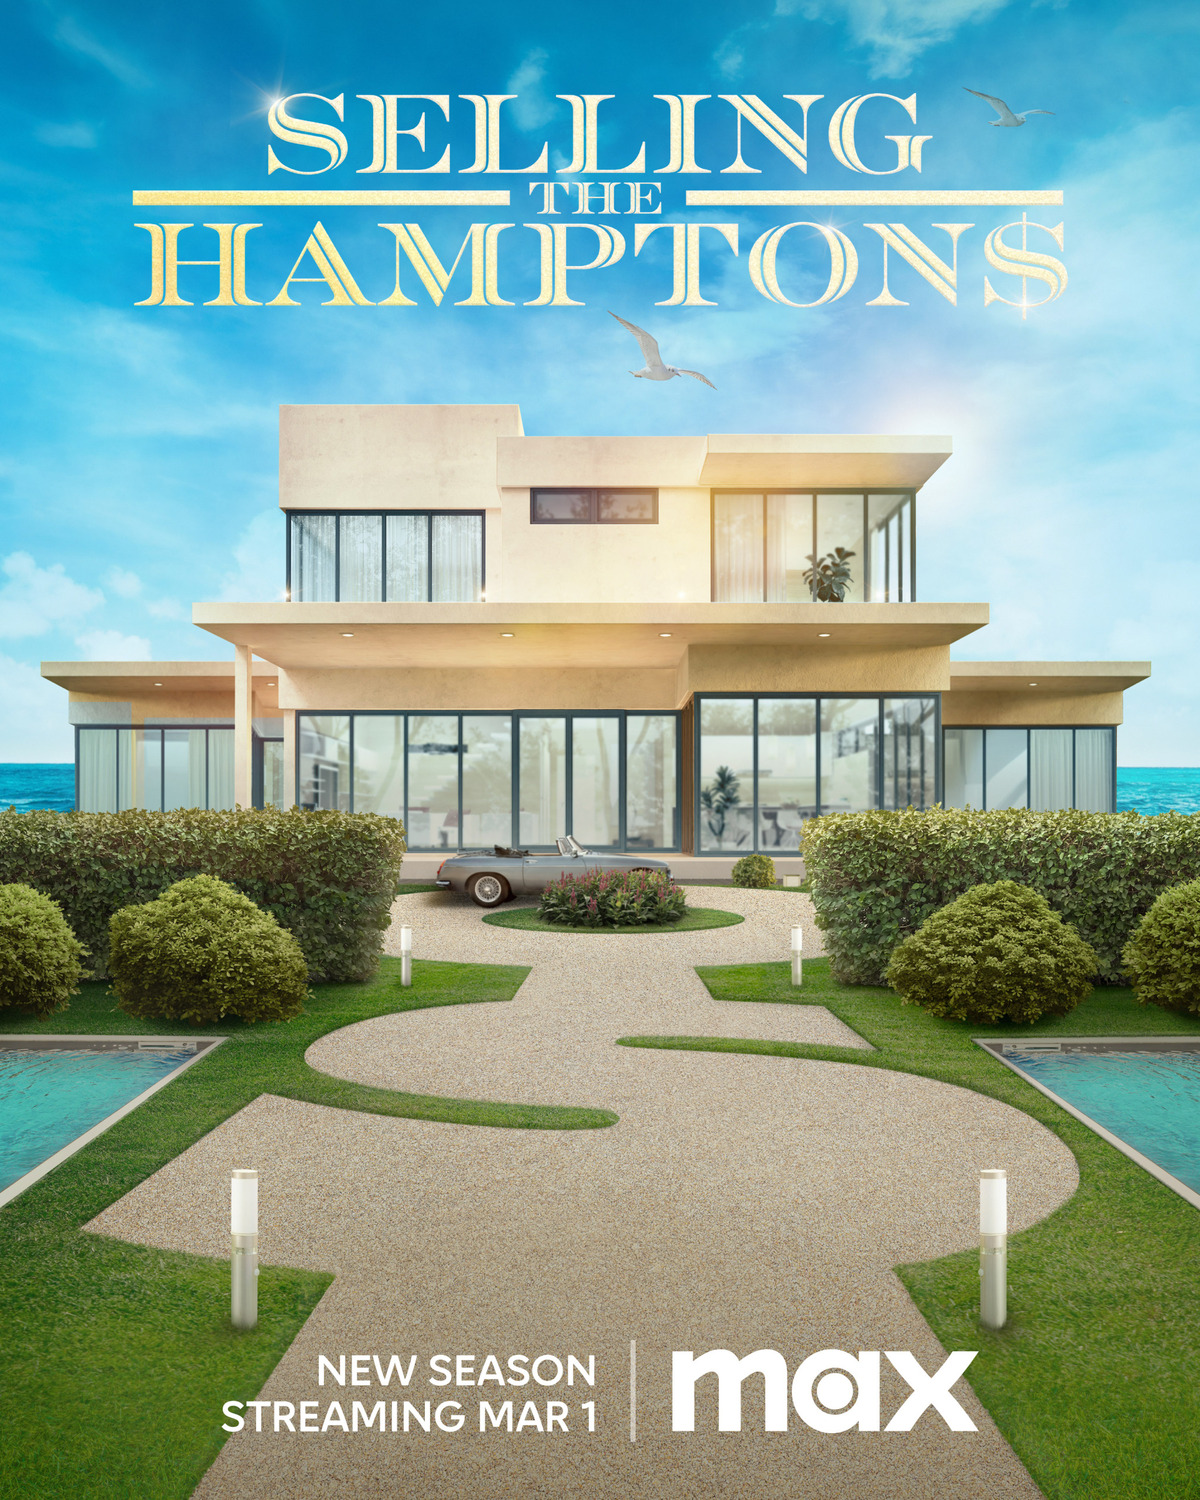 Extra Large TV Poster Image for Selling the Hamptons 